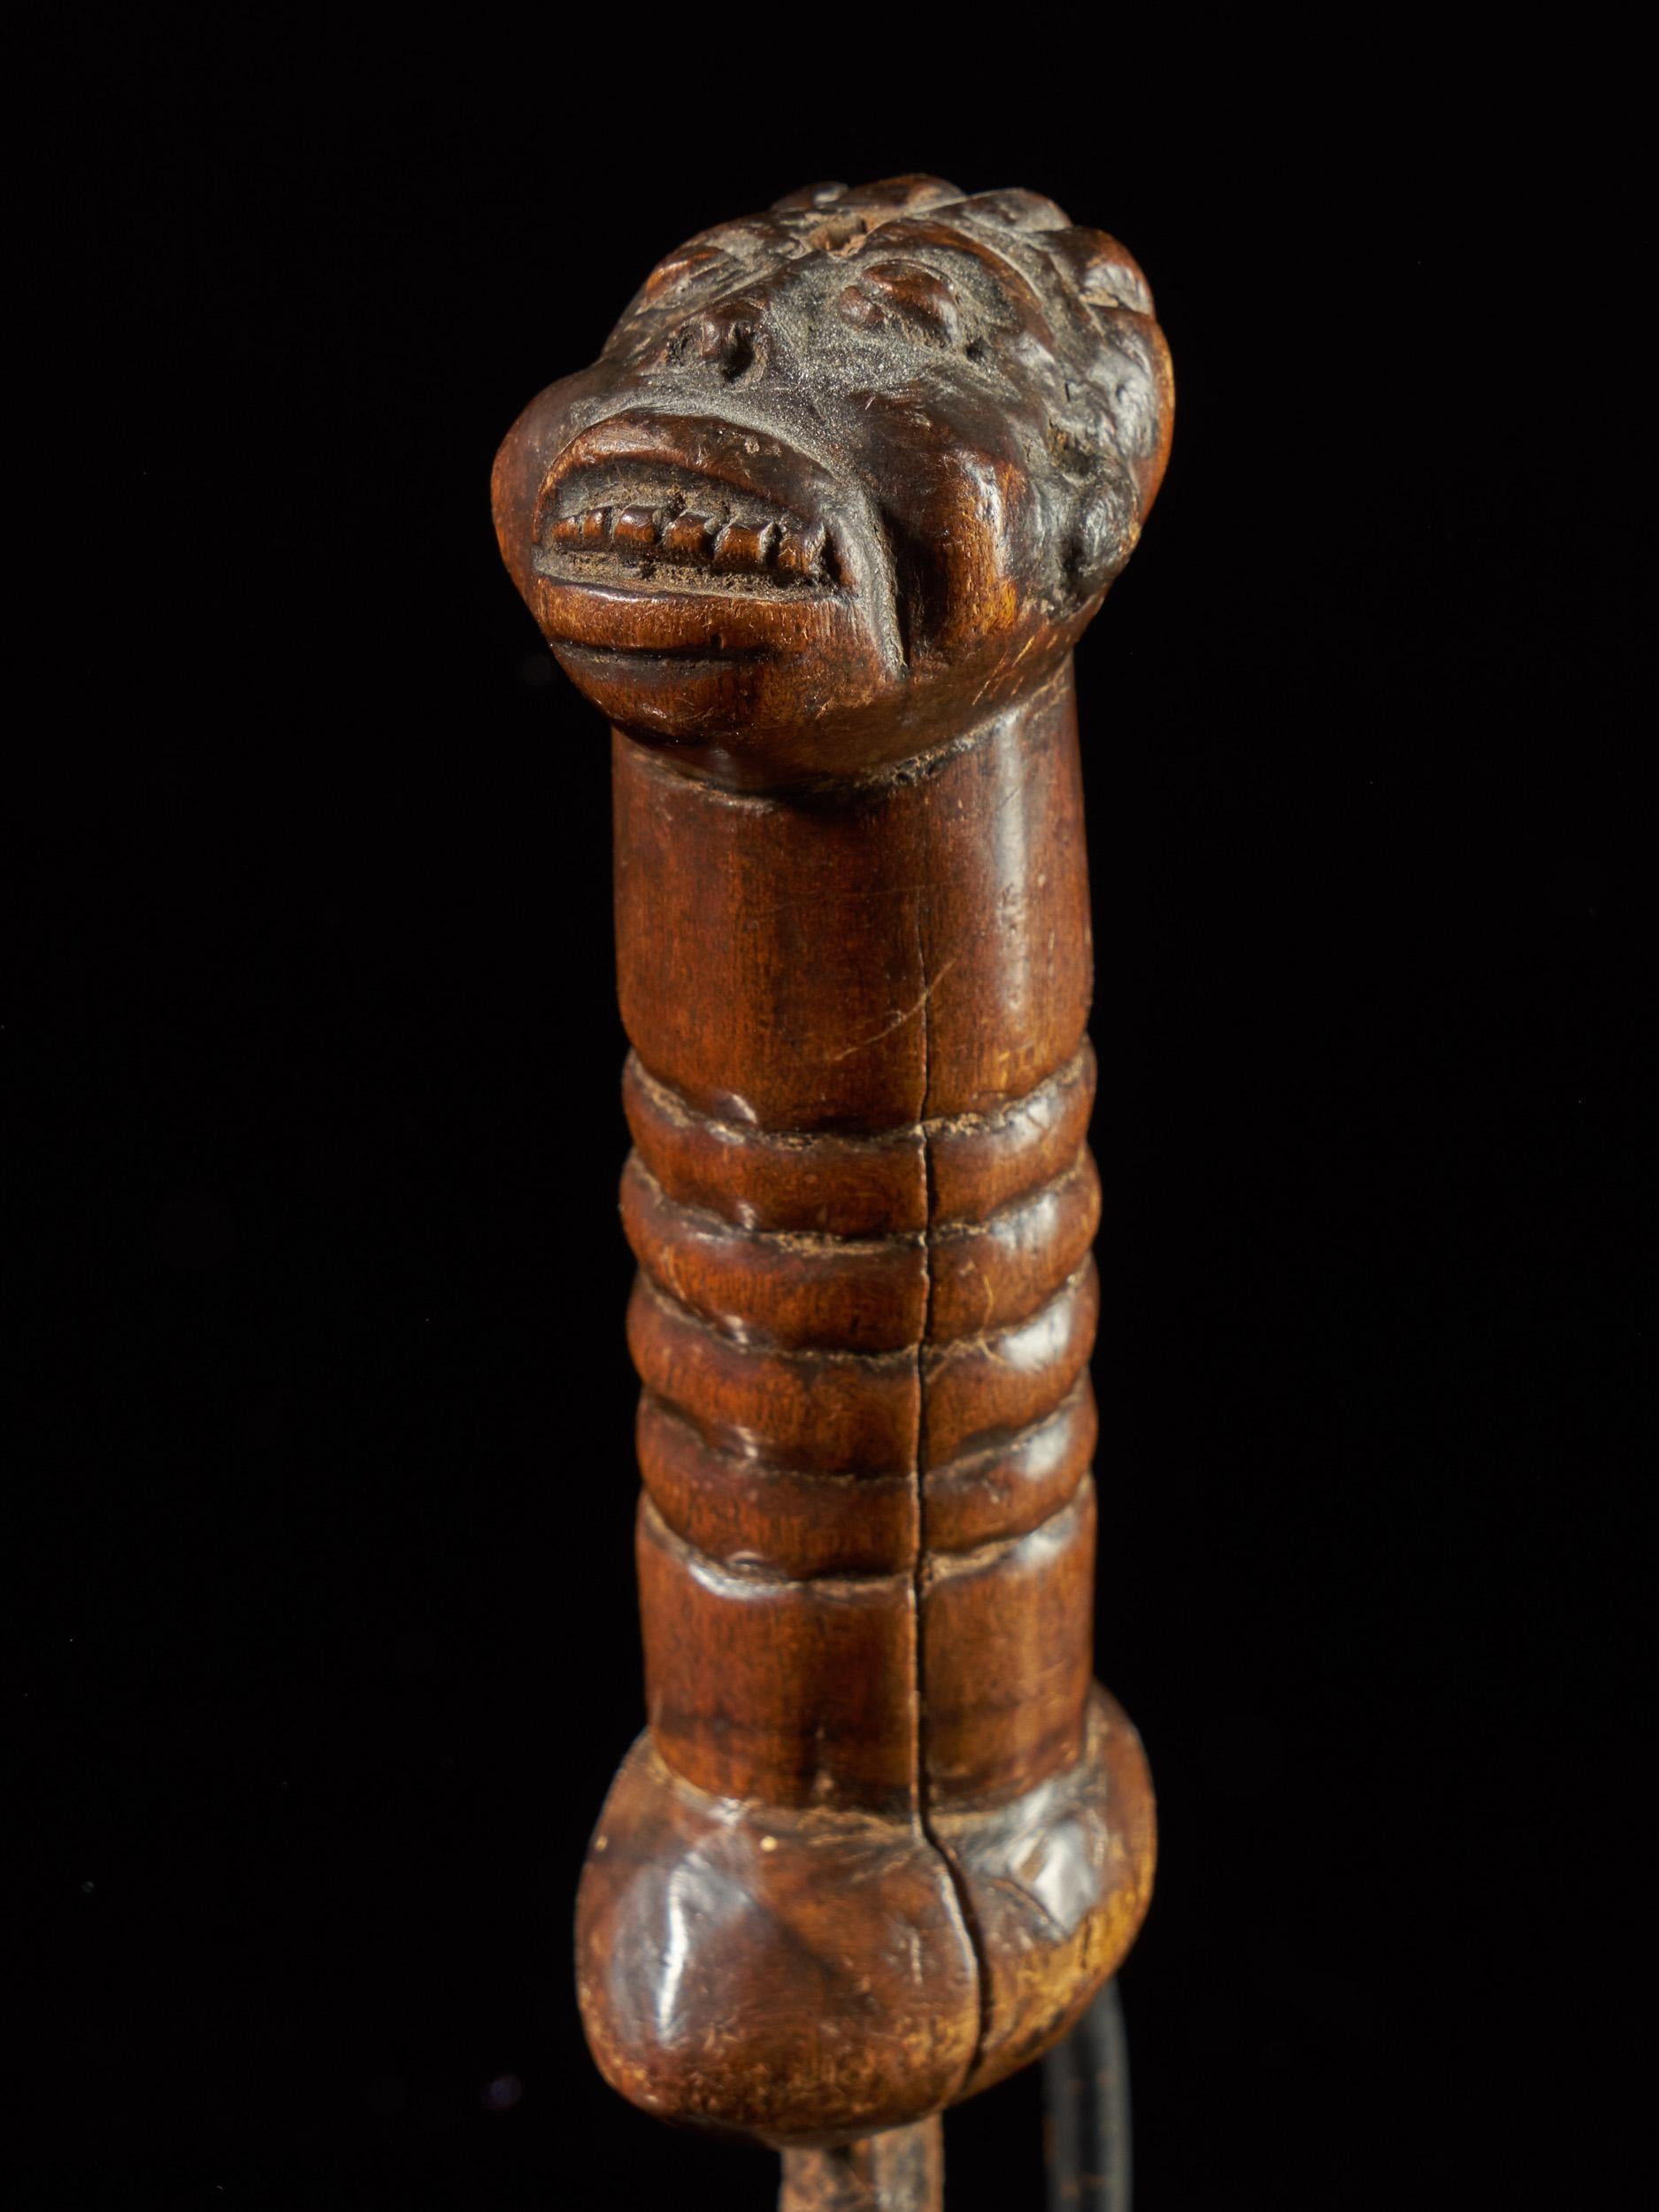 Cameroonian Bamileke People, Cameroon, Forged Knife with Carved Wooden Head